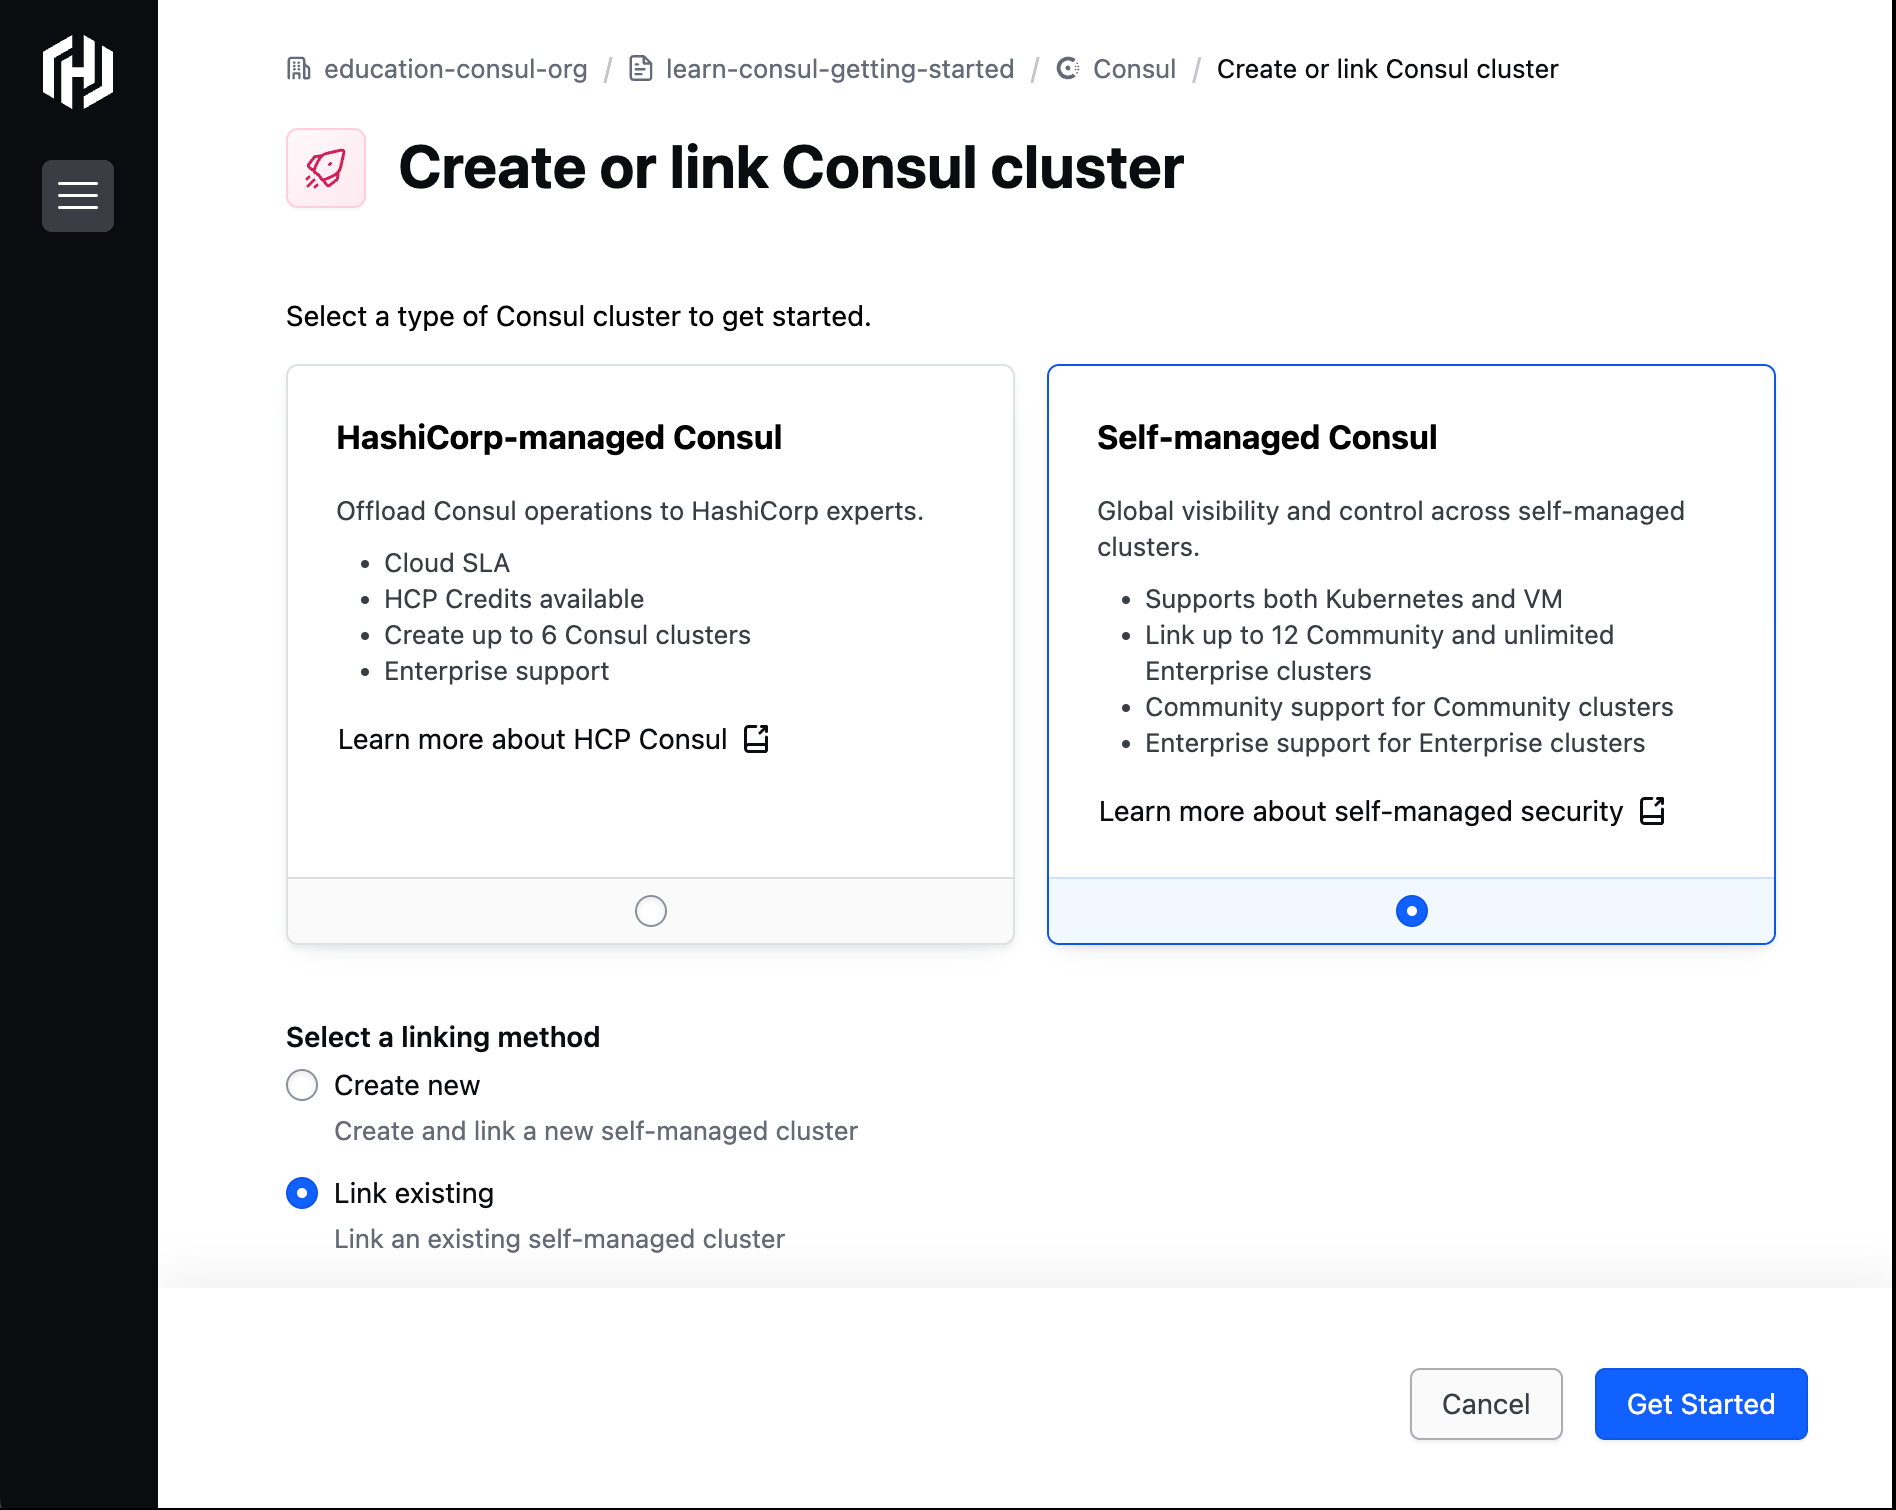 The create or link Consul cluster page. The screen displays various options to link a Consul cluster.